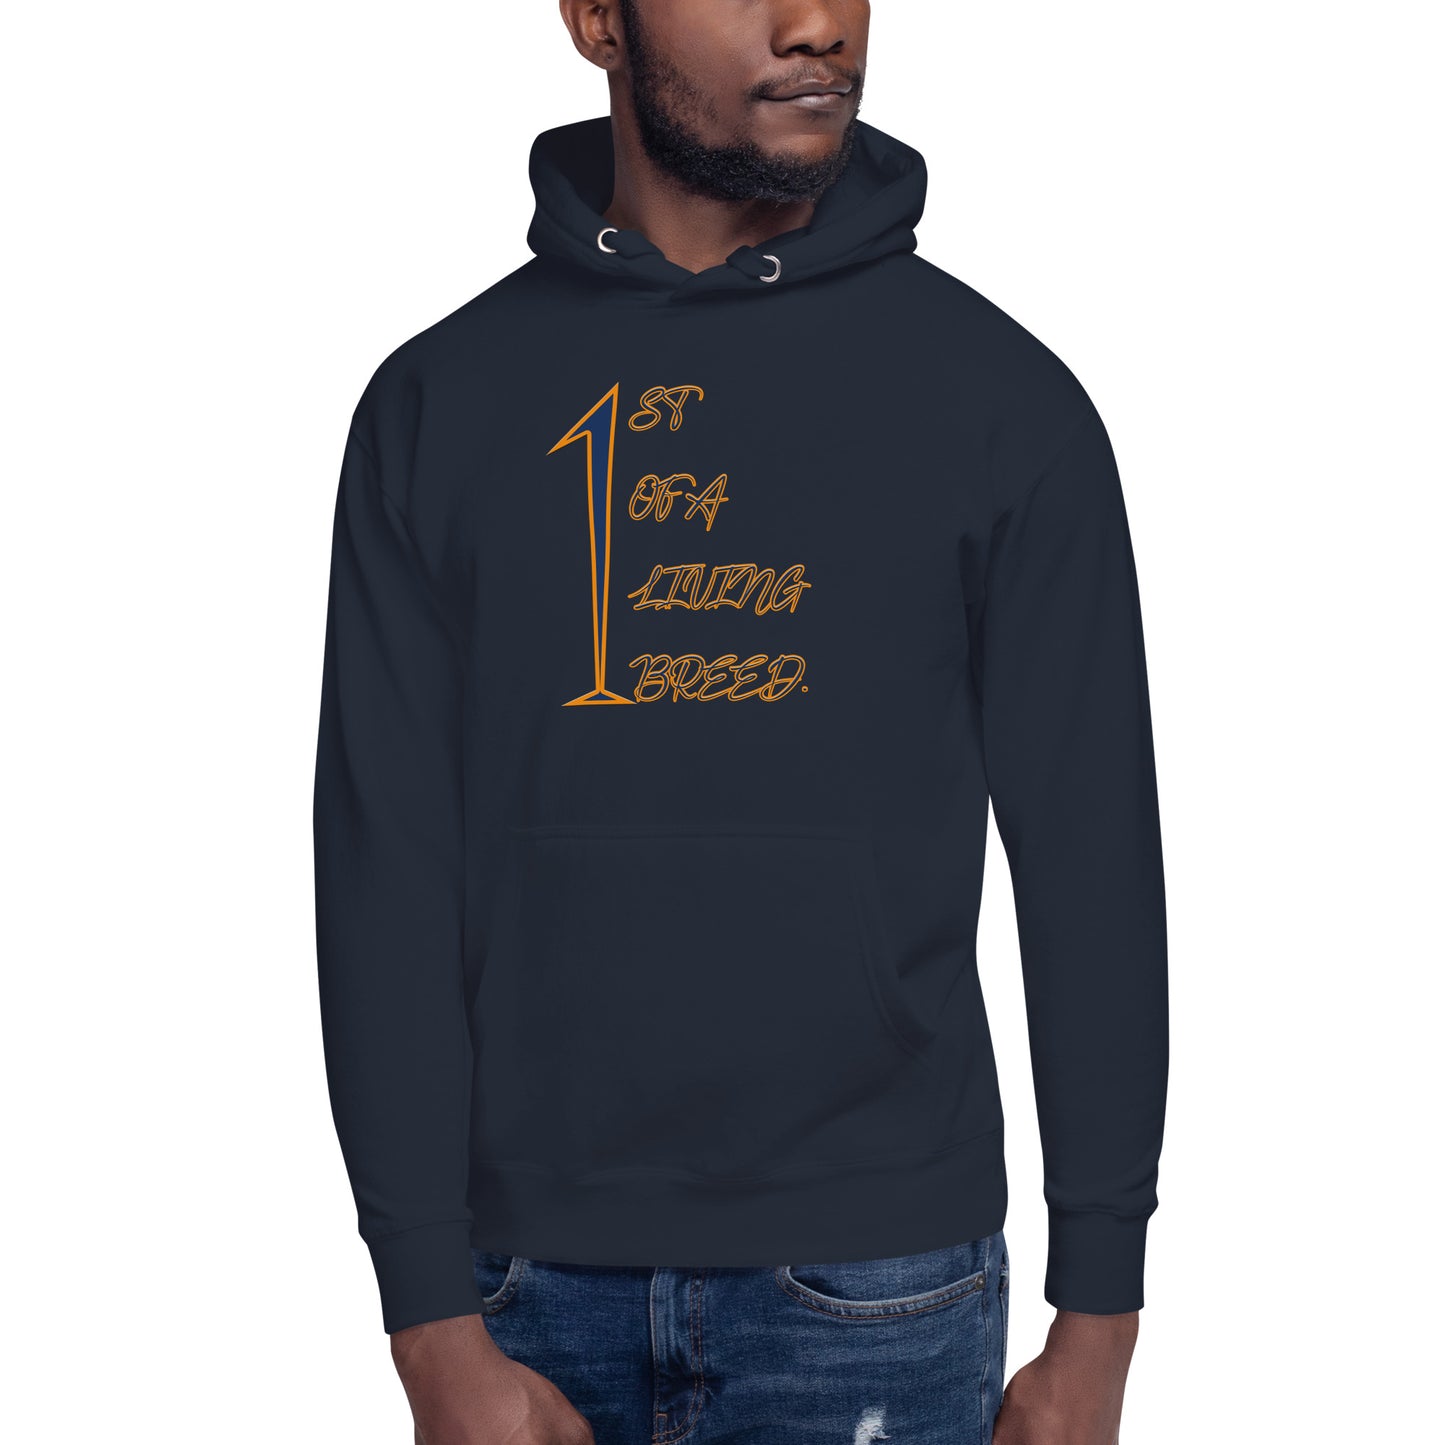 First Of A Living Breed Premium Hoodie